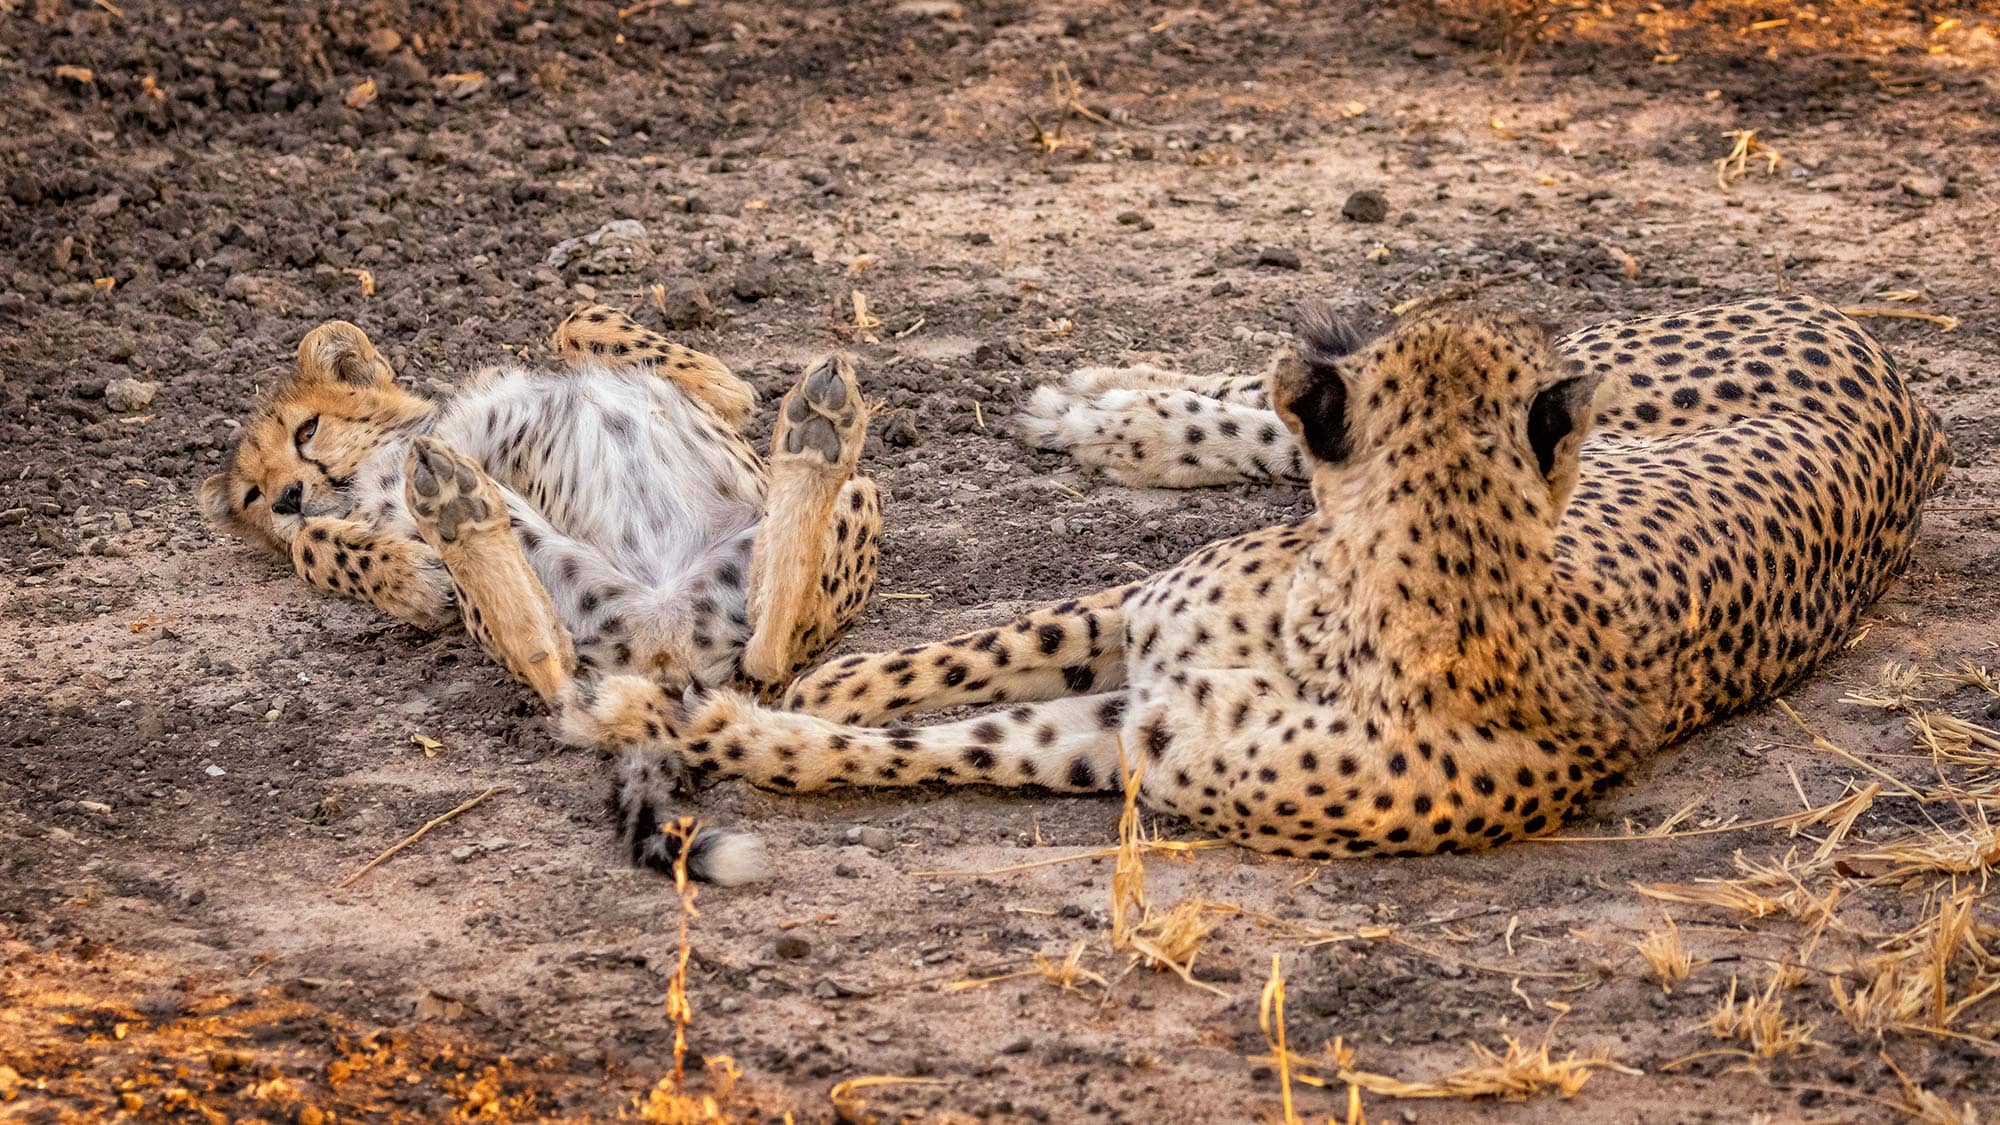 Two cheetahs relax in the dirt